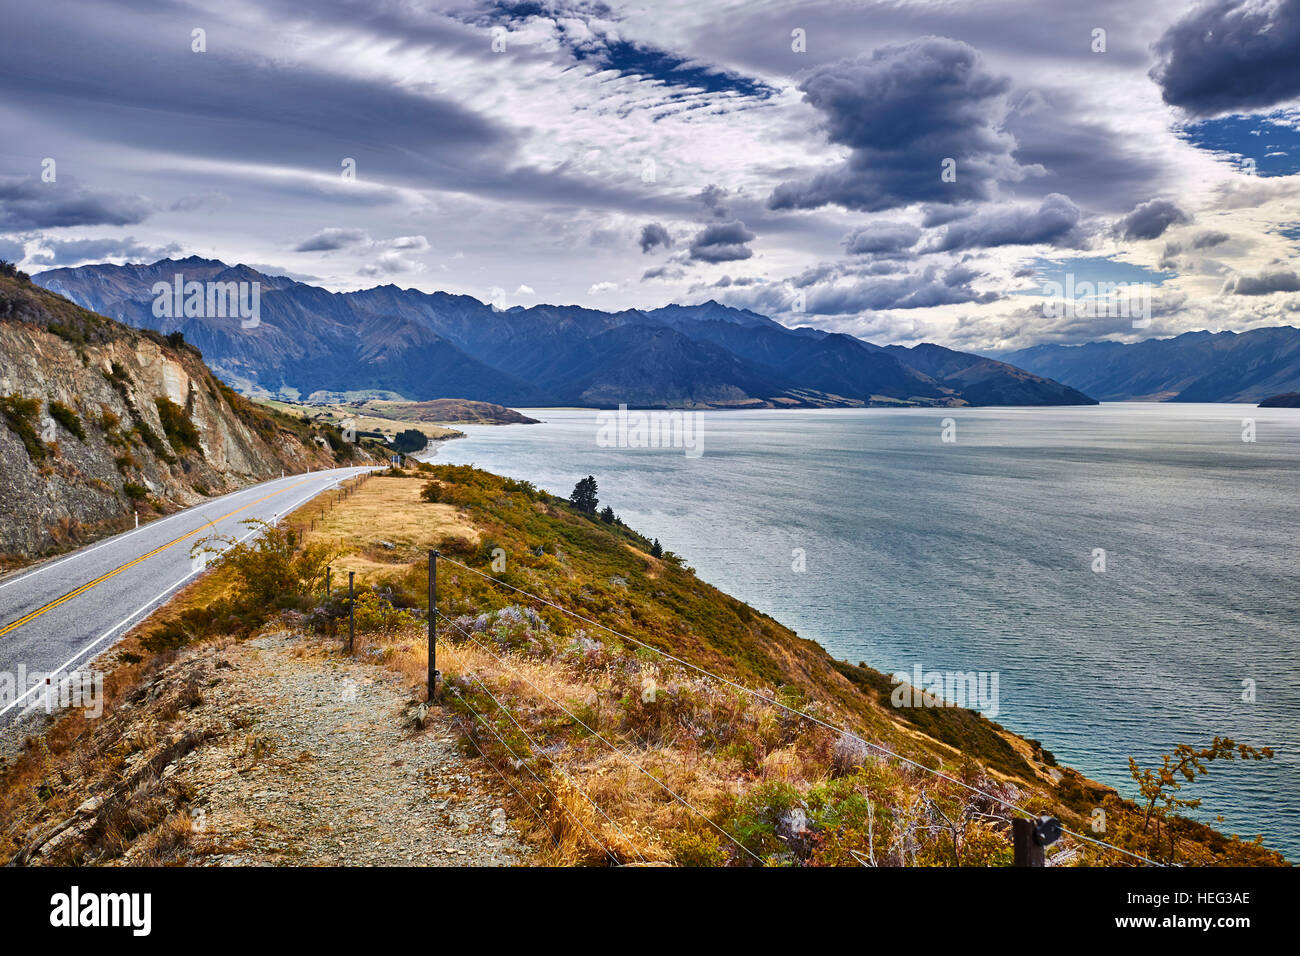 New Zealand, south island, southern scenic route, lake Hawea, picturesque street through mountains, cloudy, mountain ranges Stock Photo